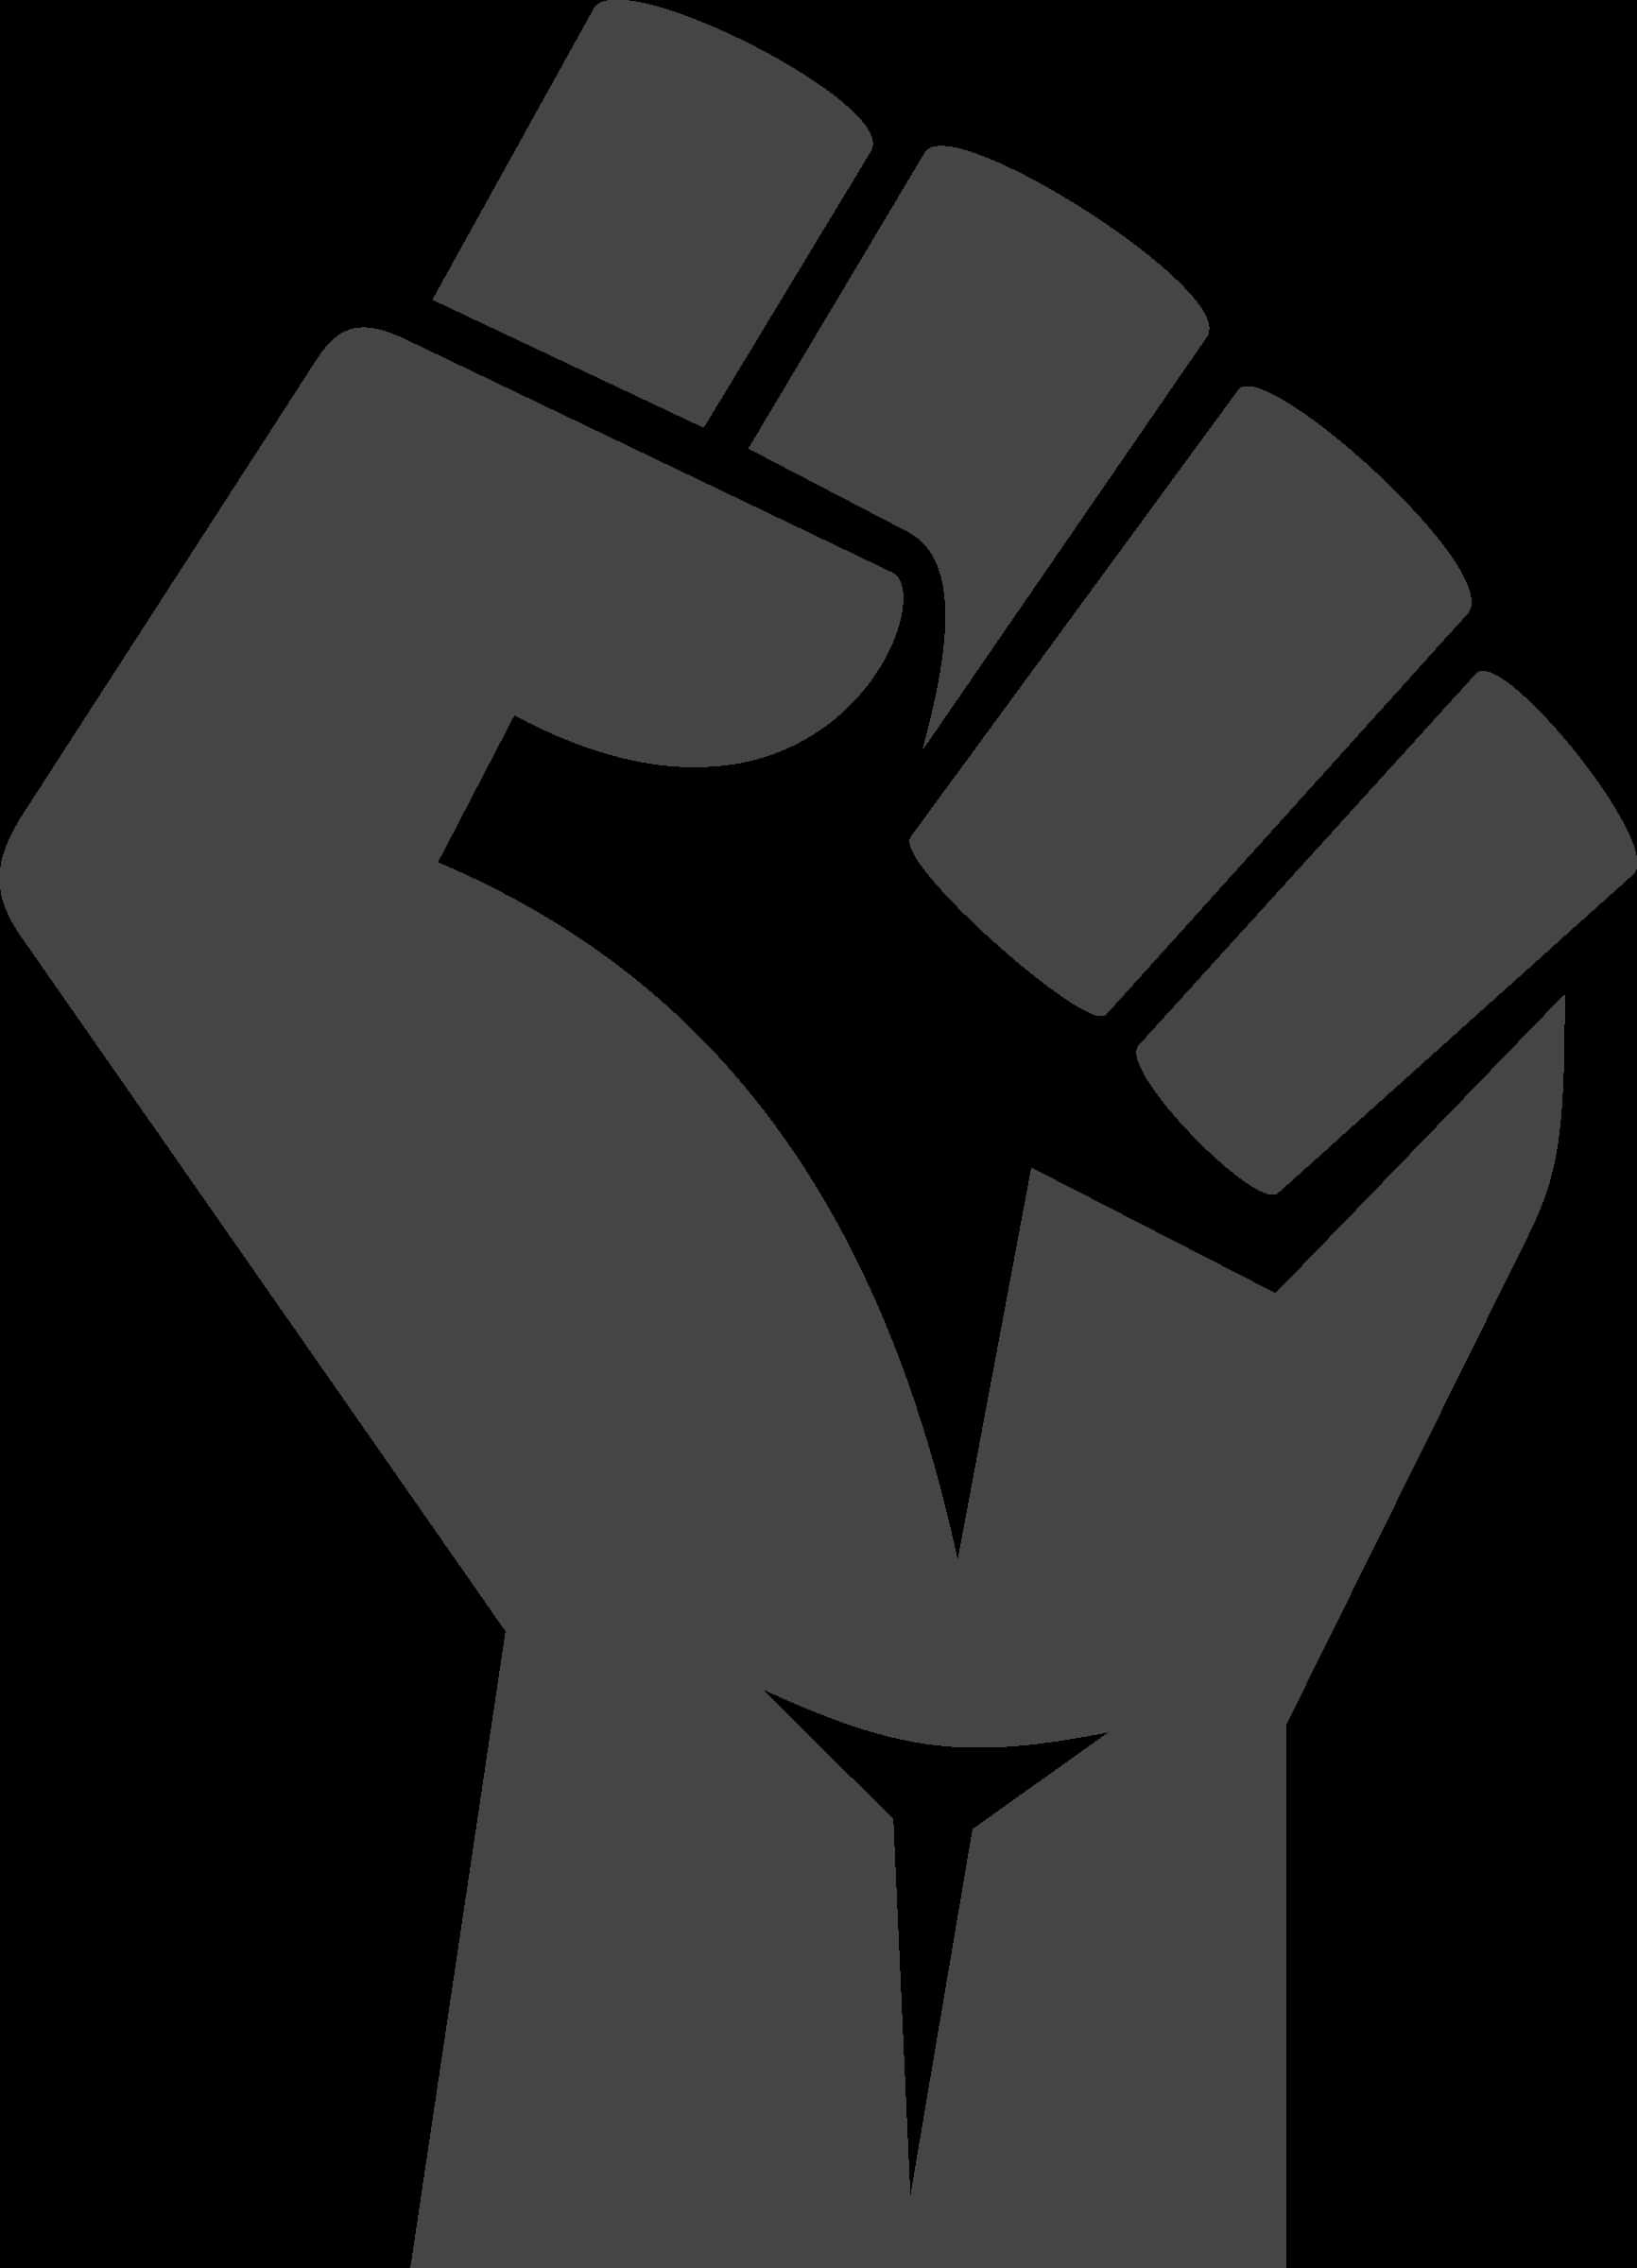 A Black And Grey Symbol With A Fist